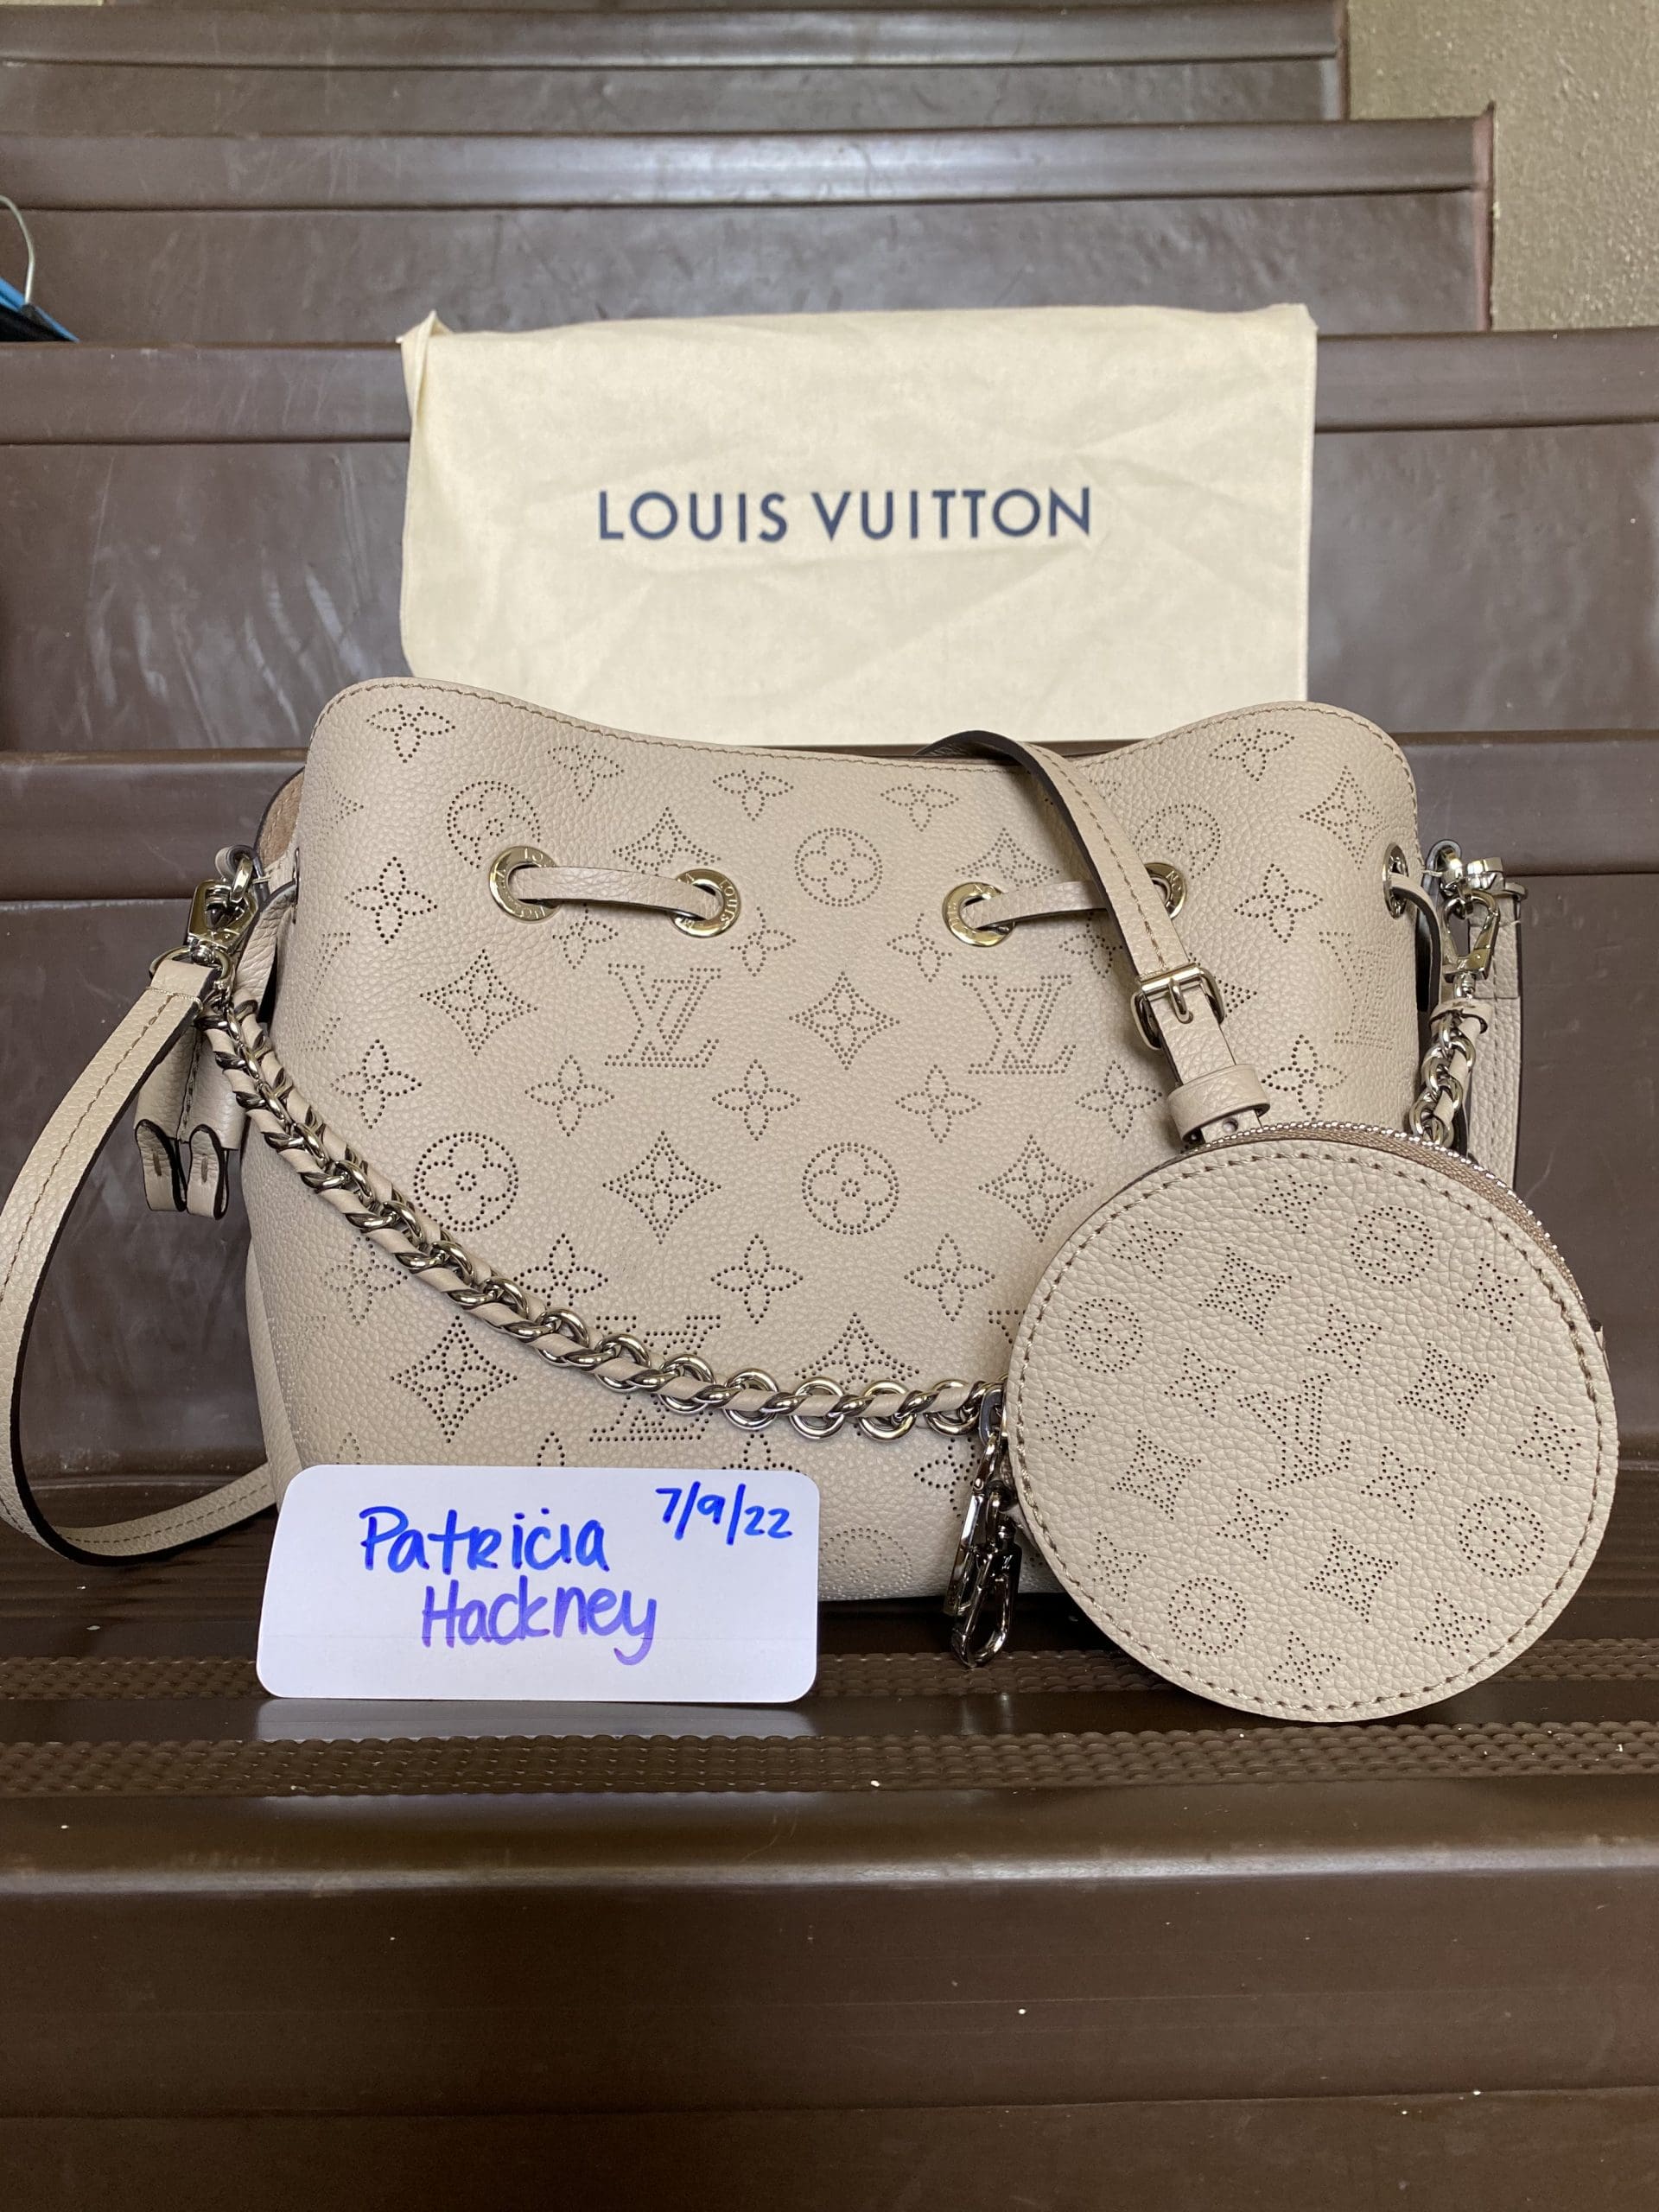 Louis Vuitton Bella Bucket Bag Galet in Perforated Calf Leather